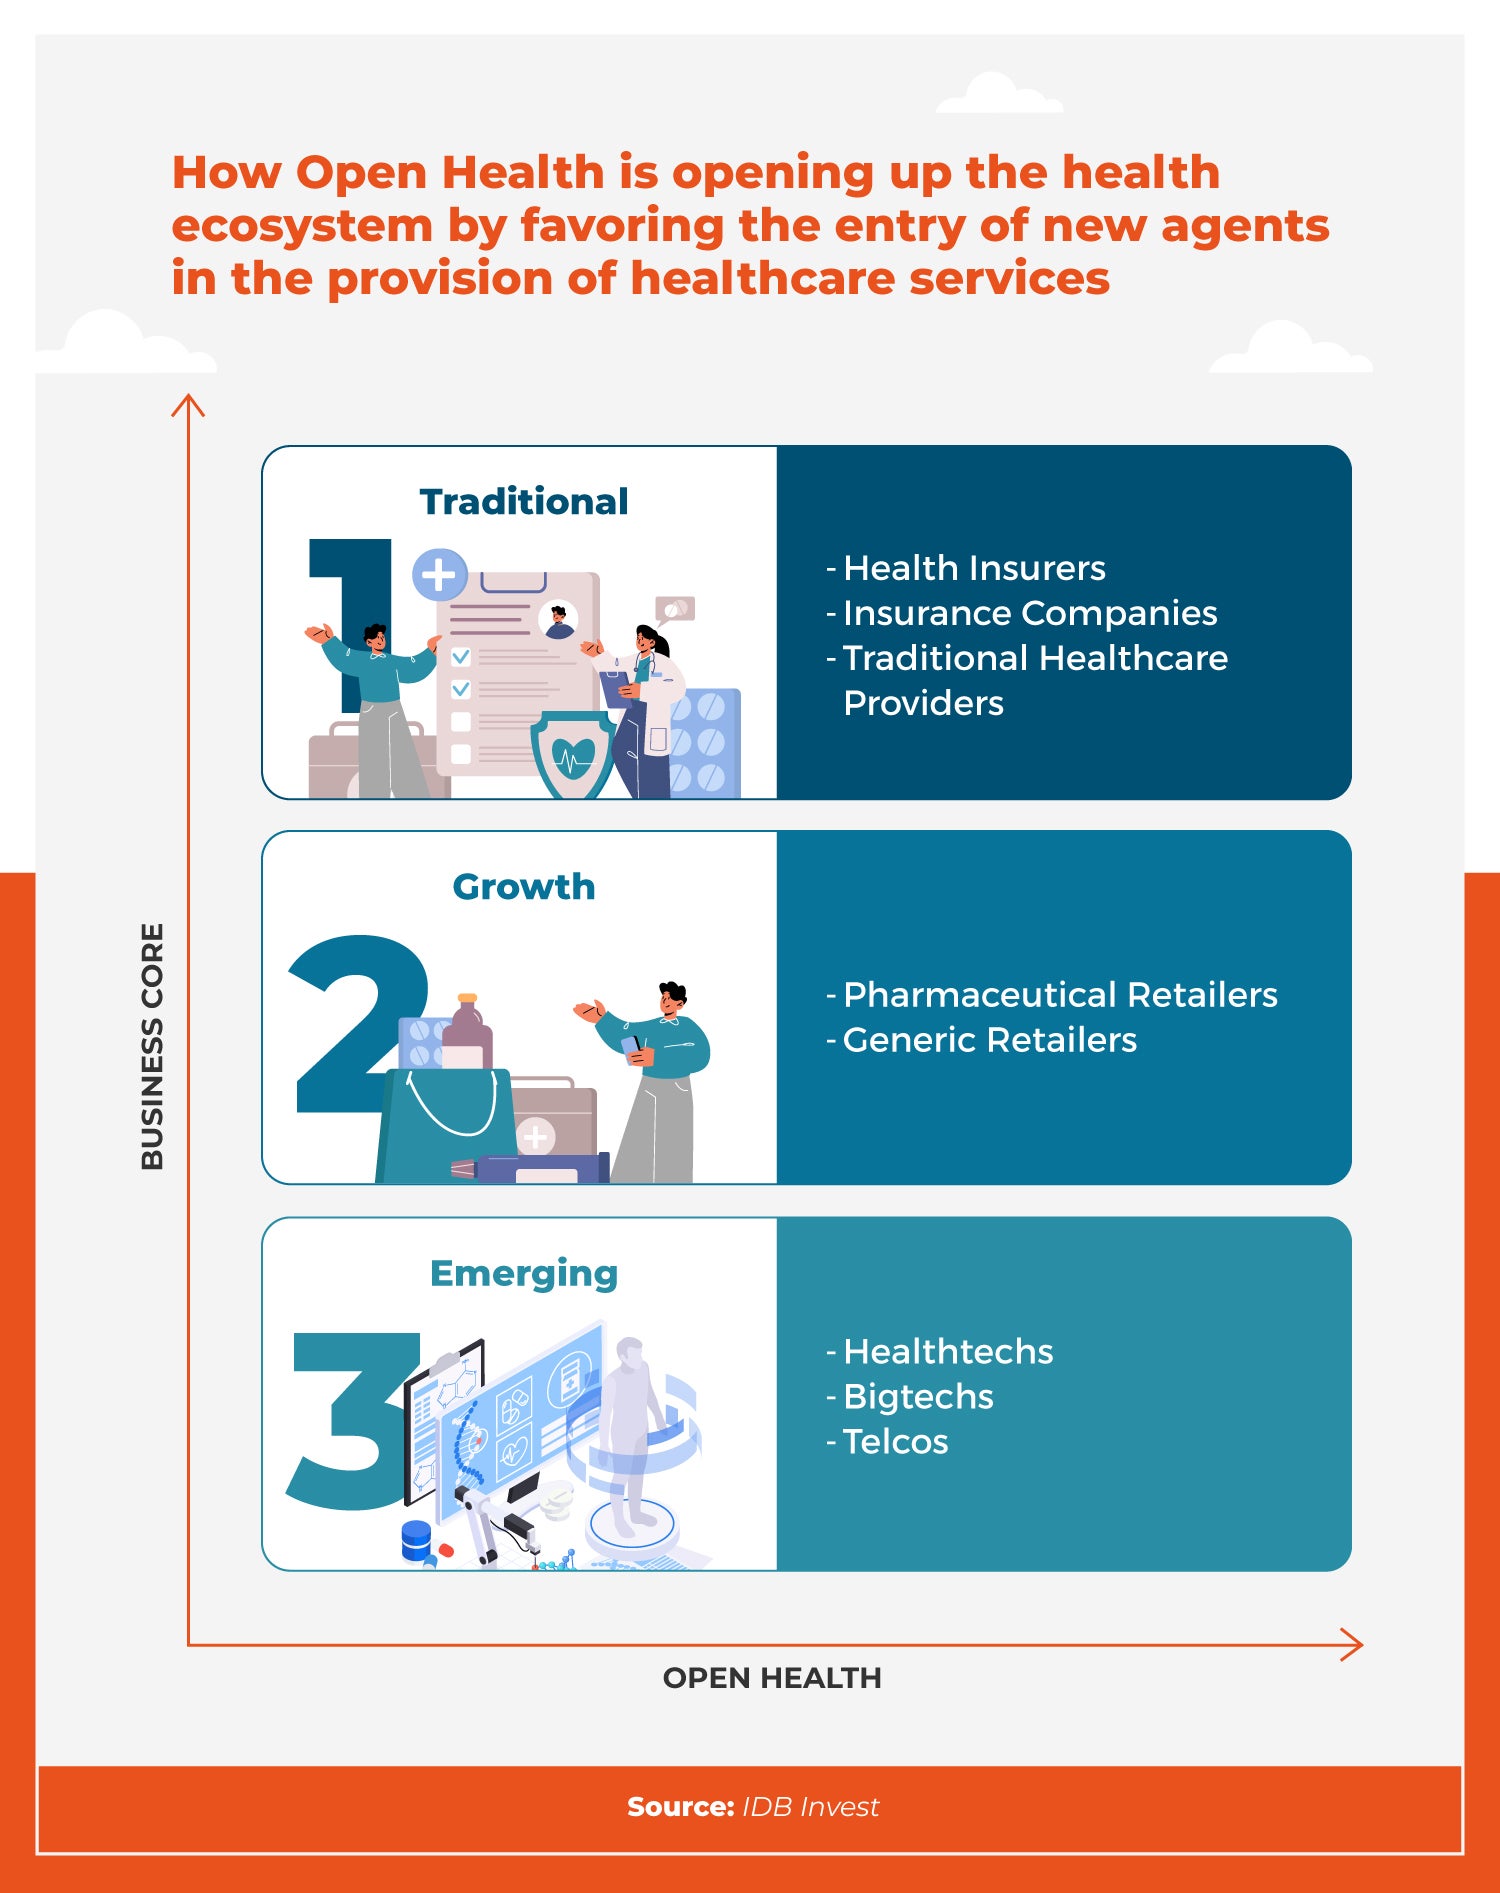 Graphic sdhowing links between technology and healthcare